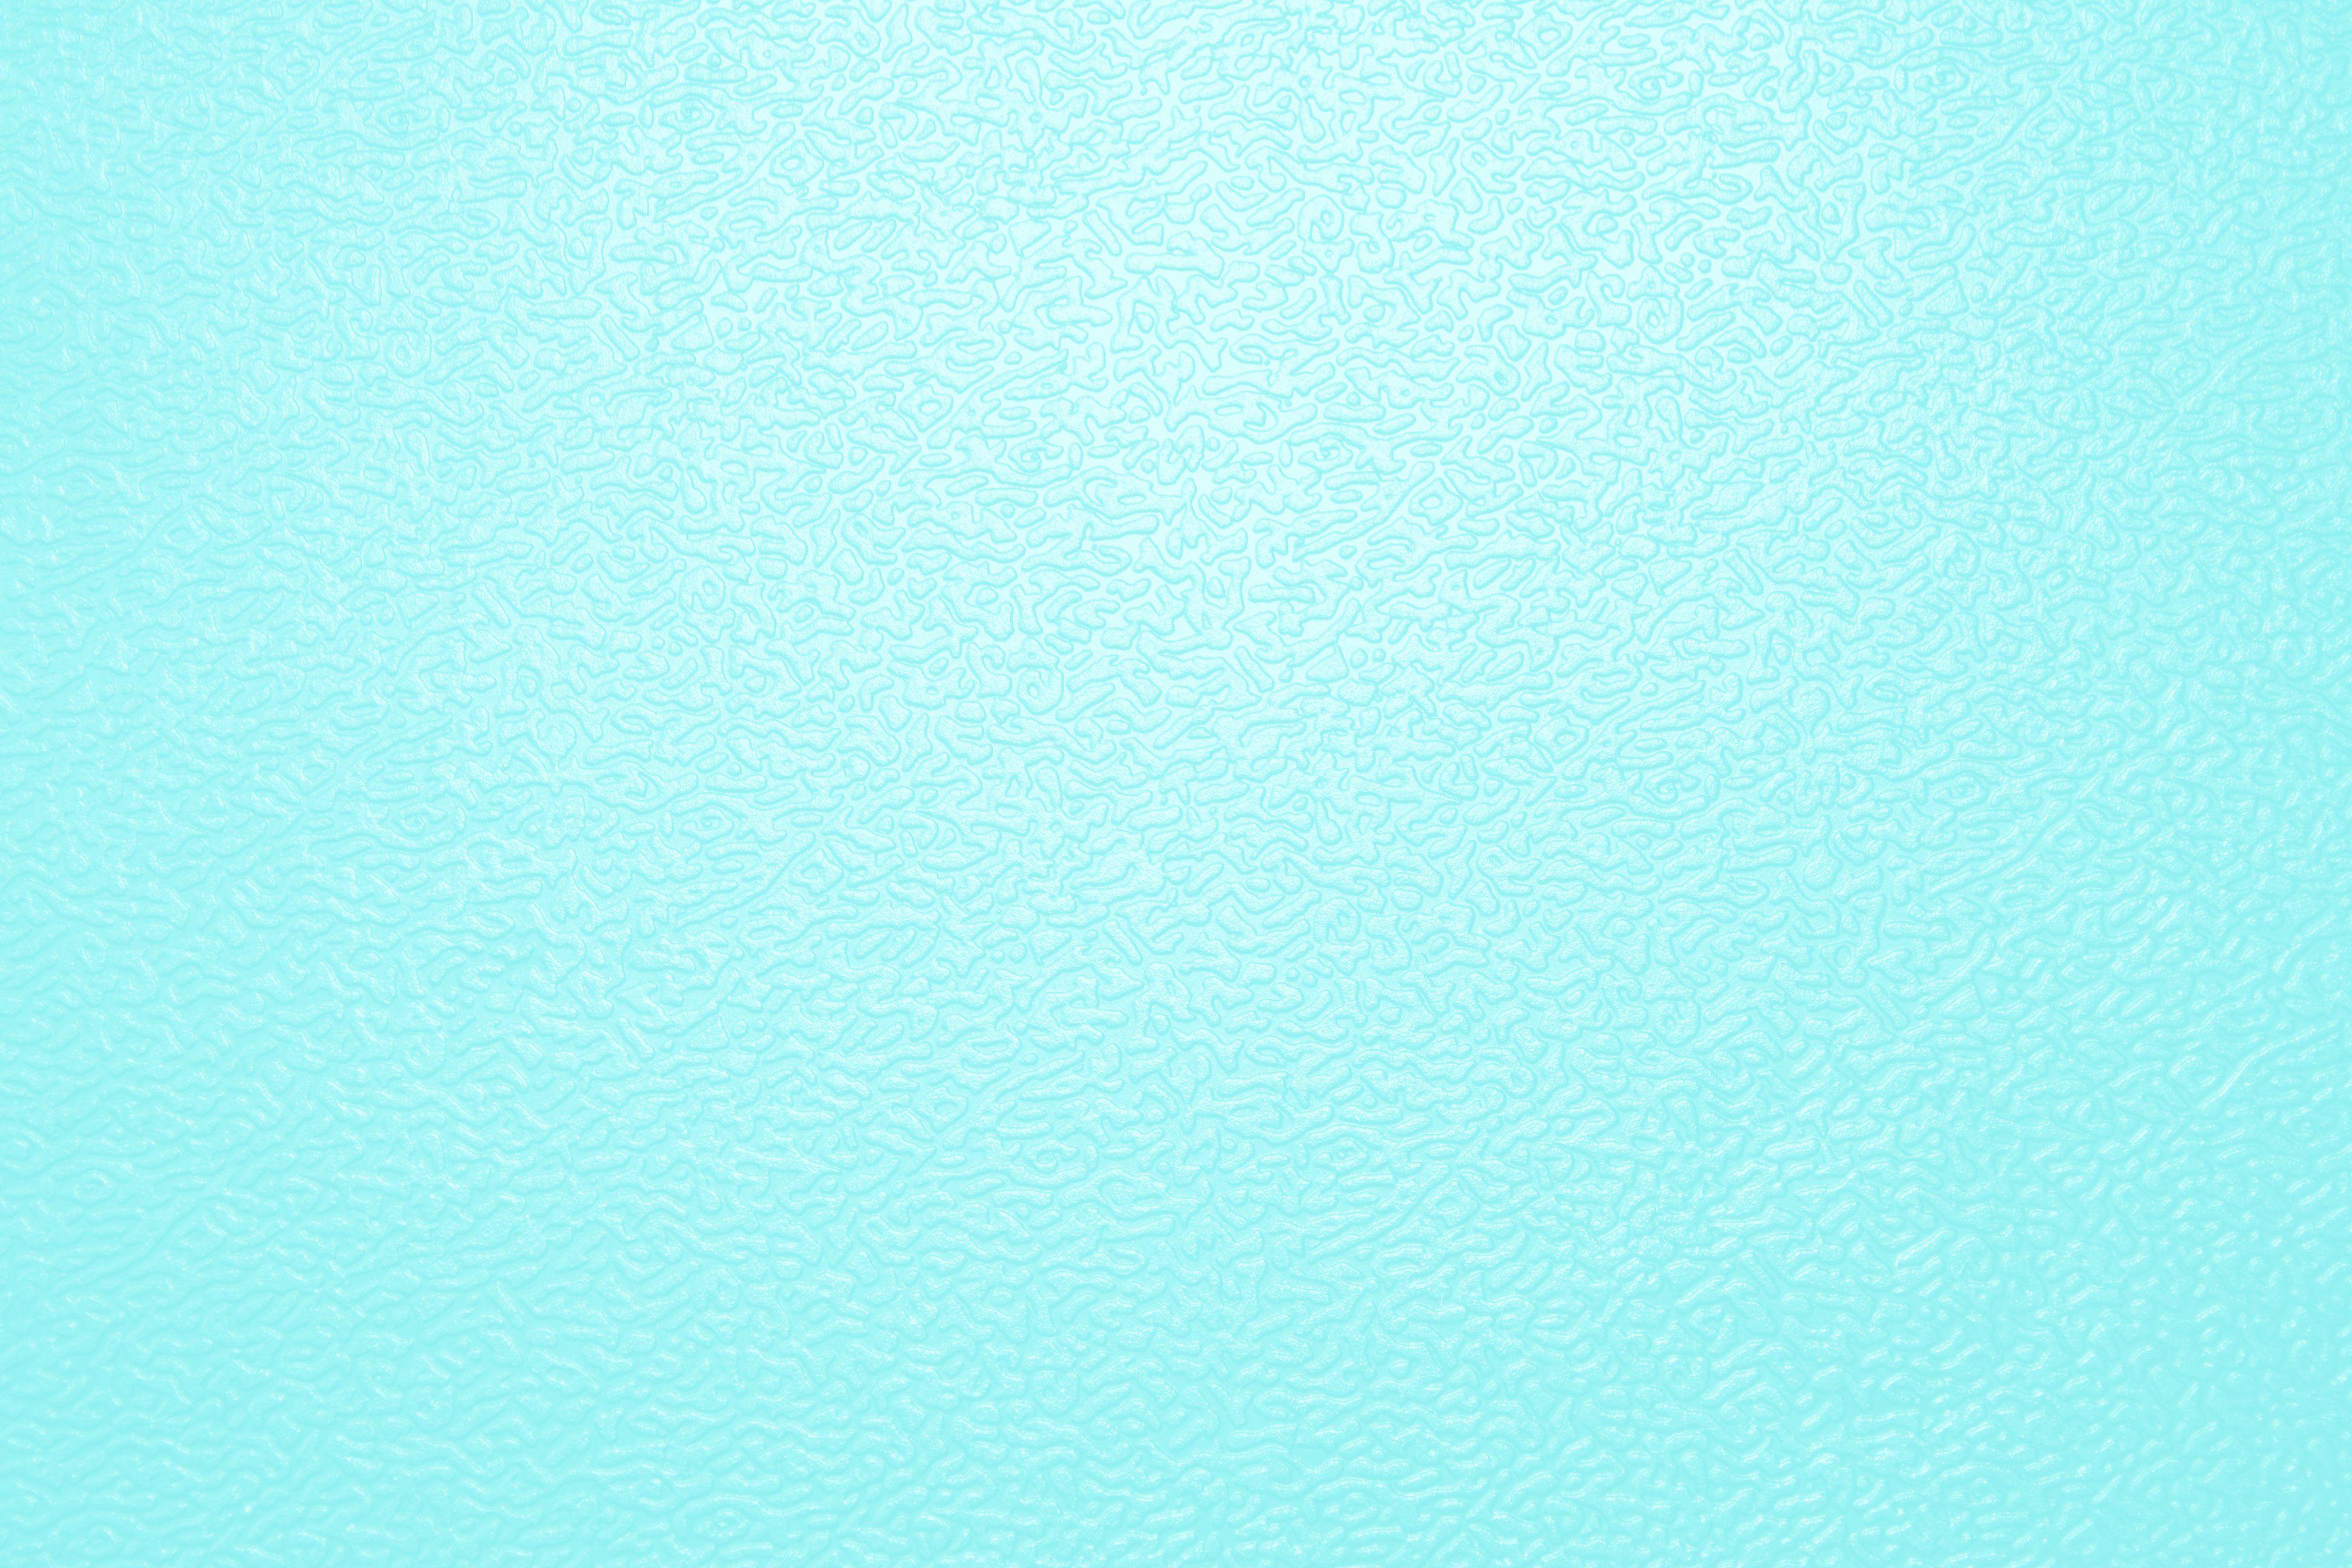 Pearl Aqua Solid Color Background Wallpaper for Mobile Phone